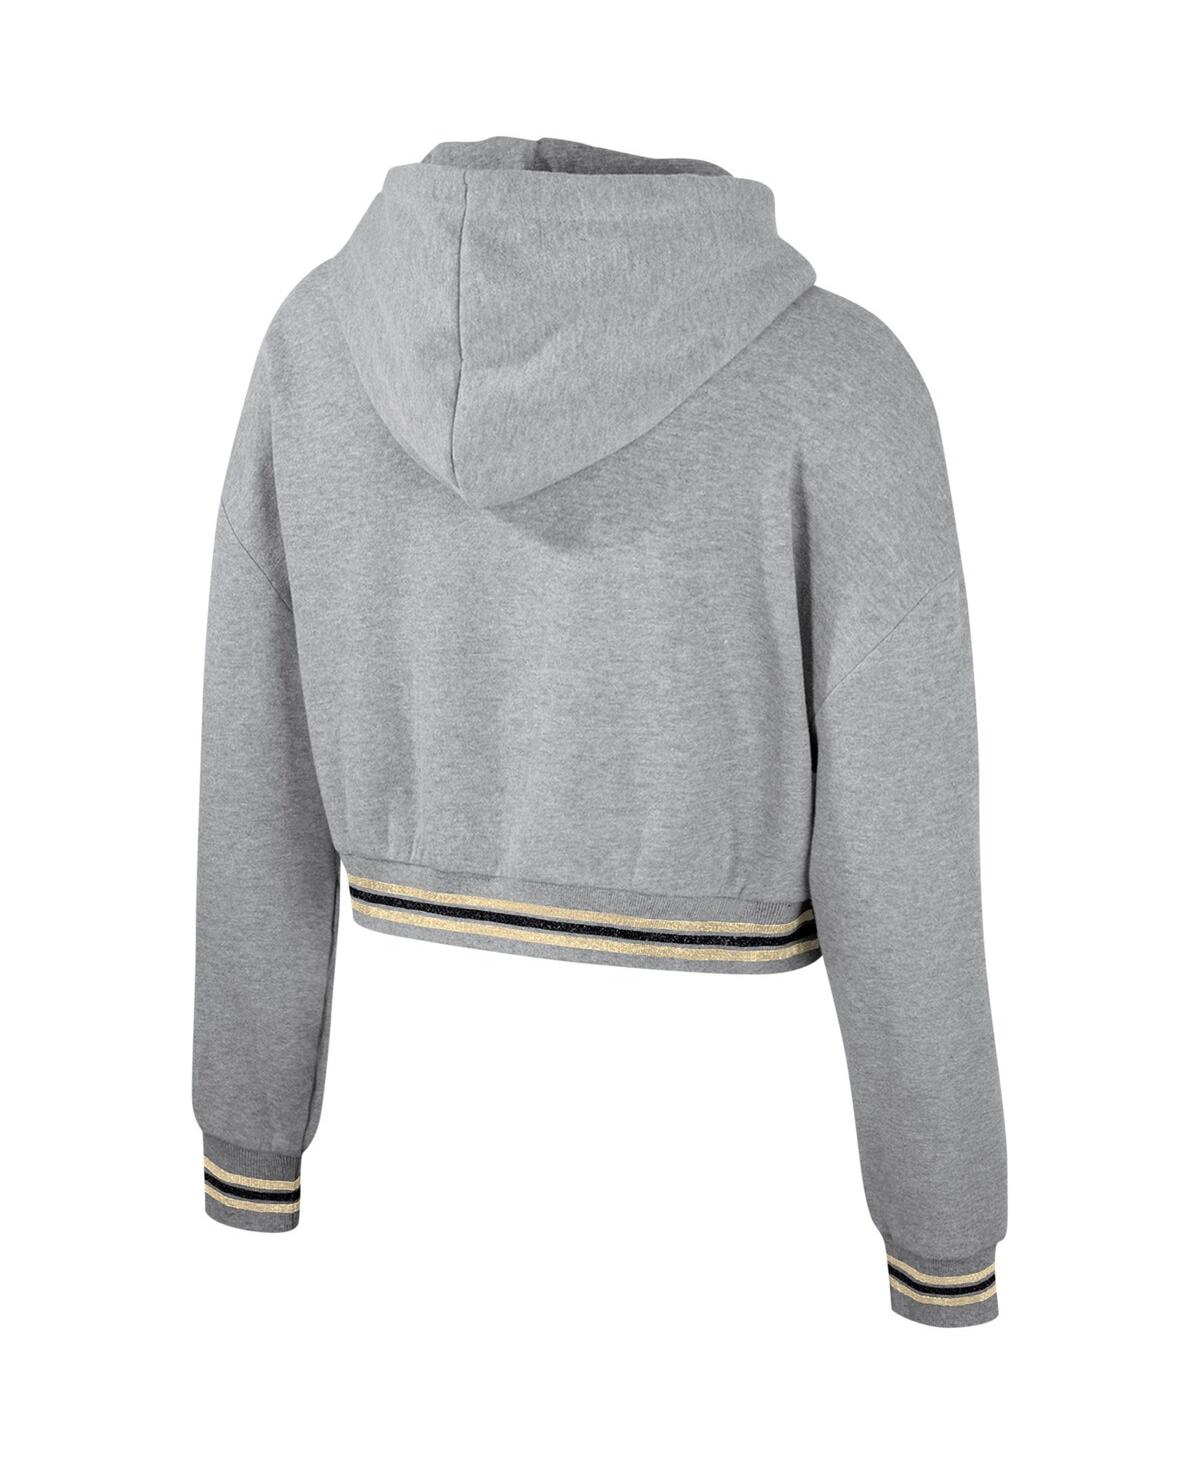 Shop The Wild Collective Women's  Heather Gray Distressed Colorado Buffaloes Cropped Shimmer Pullover Hood